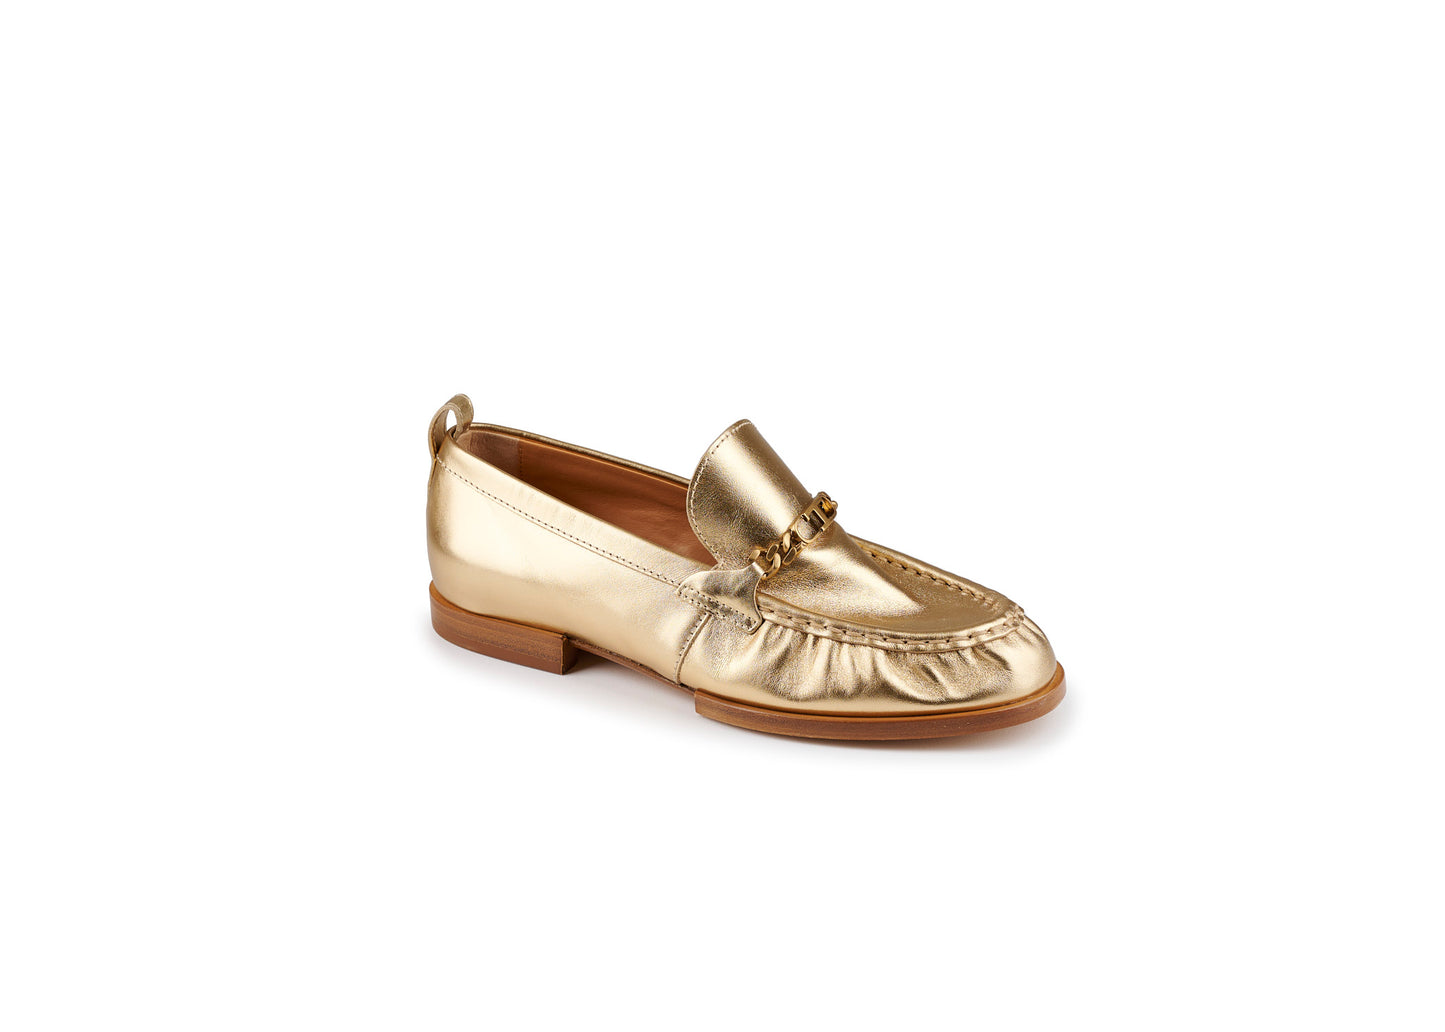 SALE Chain Link Loafer Metallic Gold was $1195